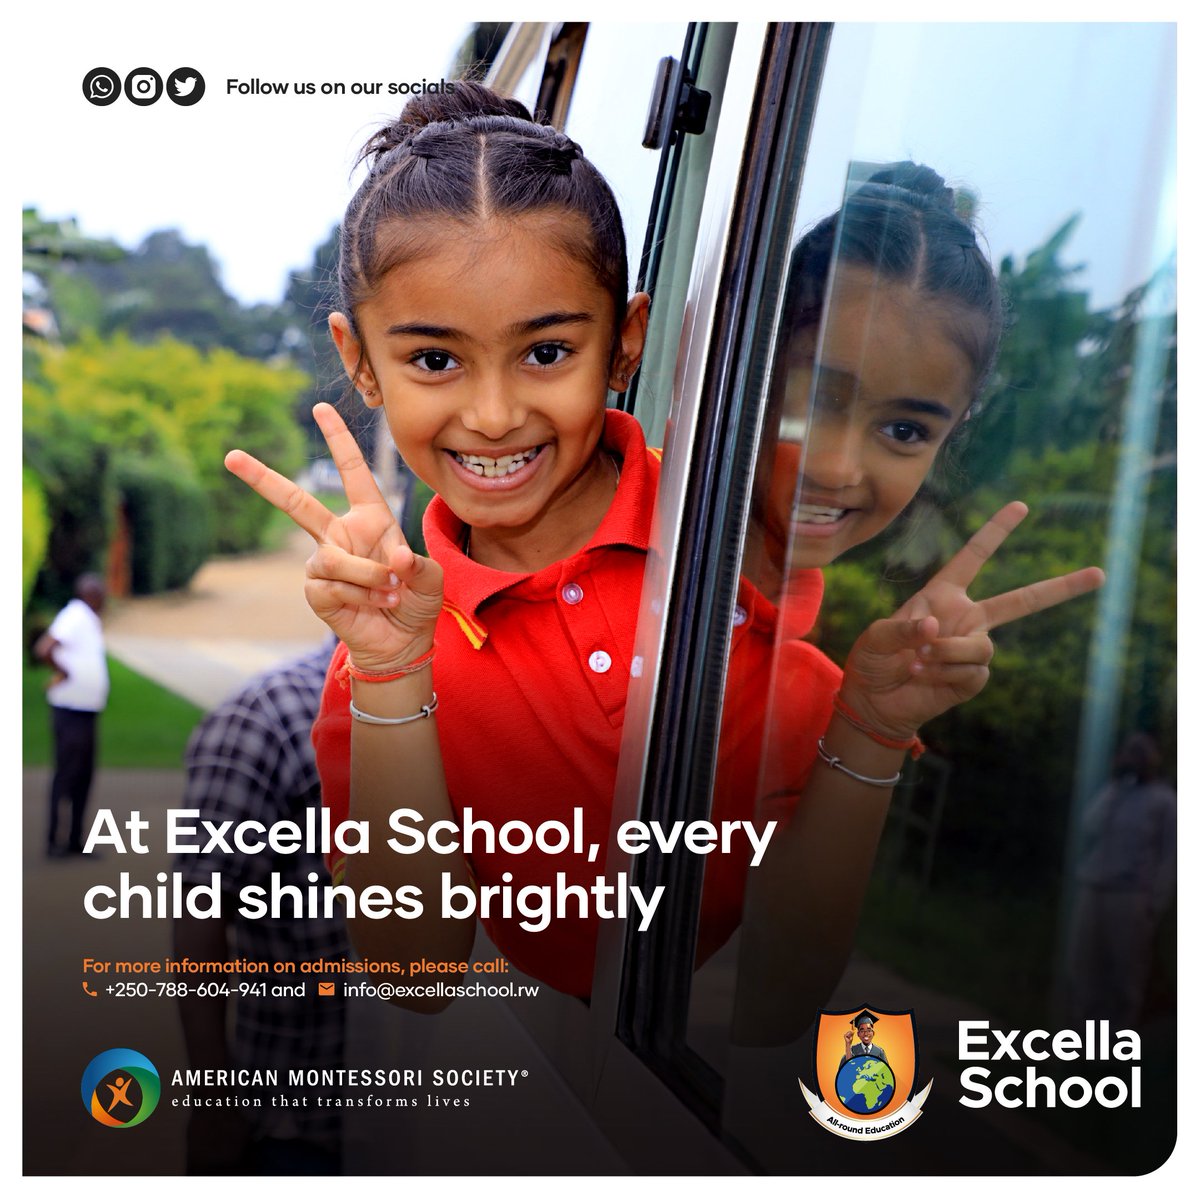 Discover inclusivity at @ExcellaSchool  celebrating each child's uniqueness. their moto 'In pursuit of a balanced education' reflects their commitment to nurturing well-rounded individuals.

#balancededucation

Repost 🙏